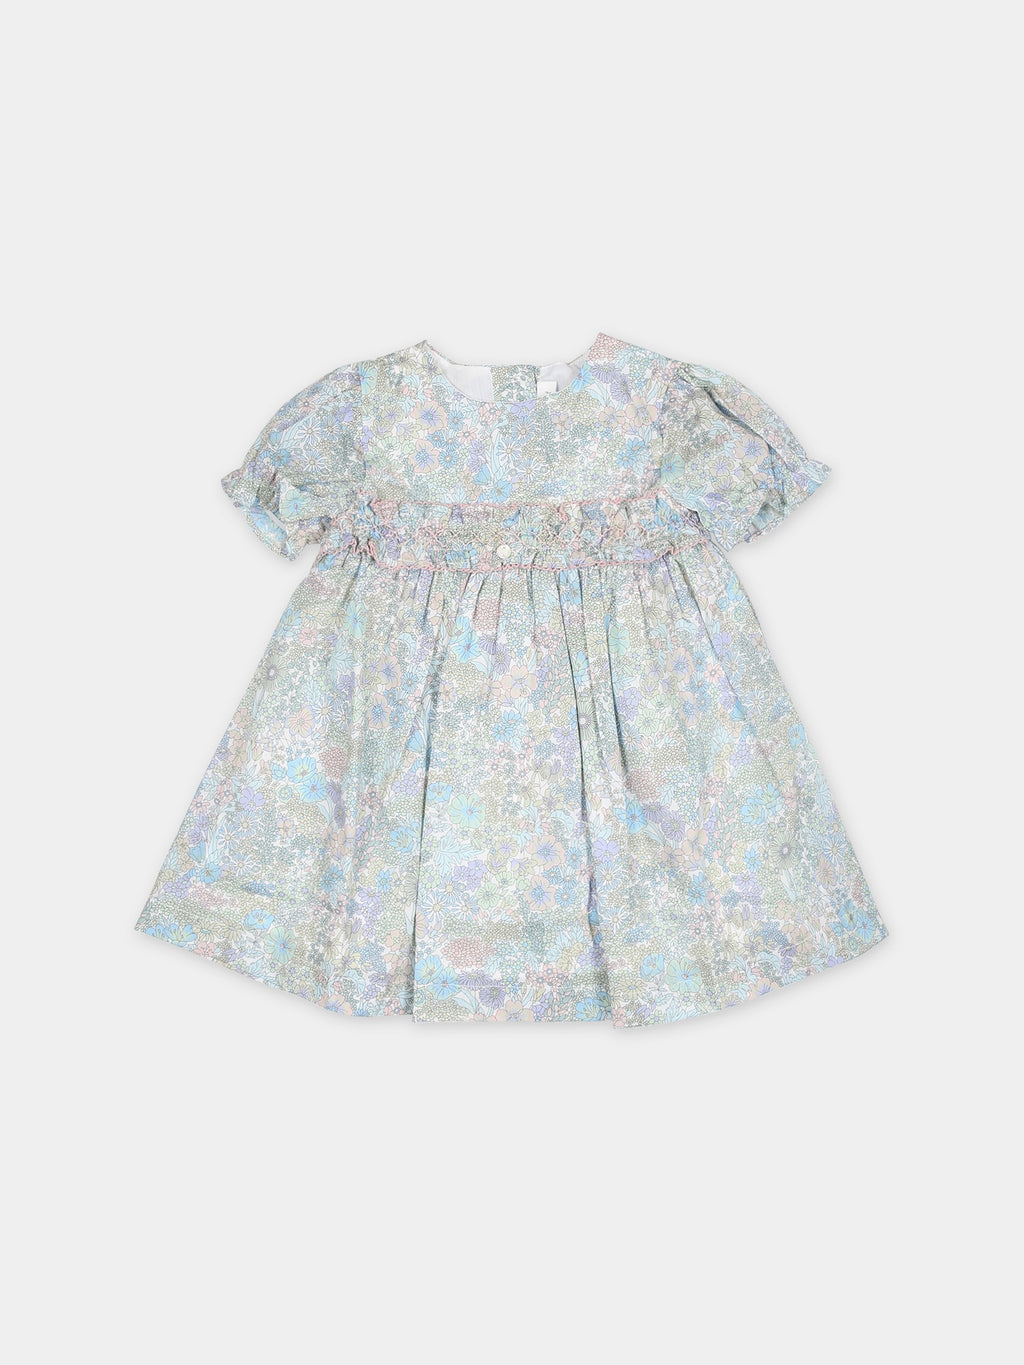 Sky blue casual dress for baby girl with Liberty fabric